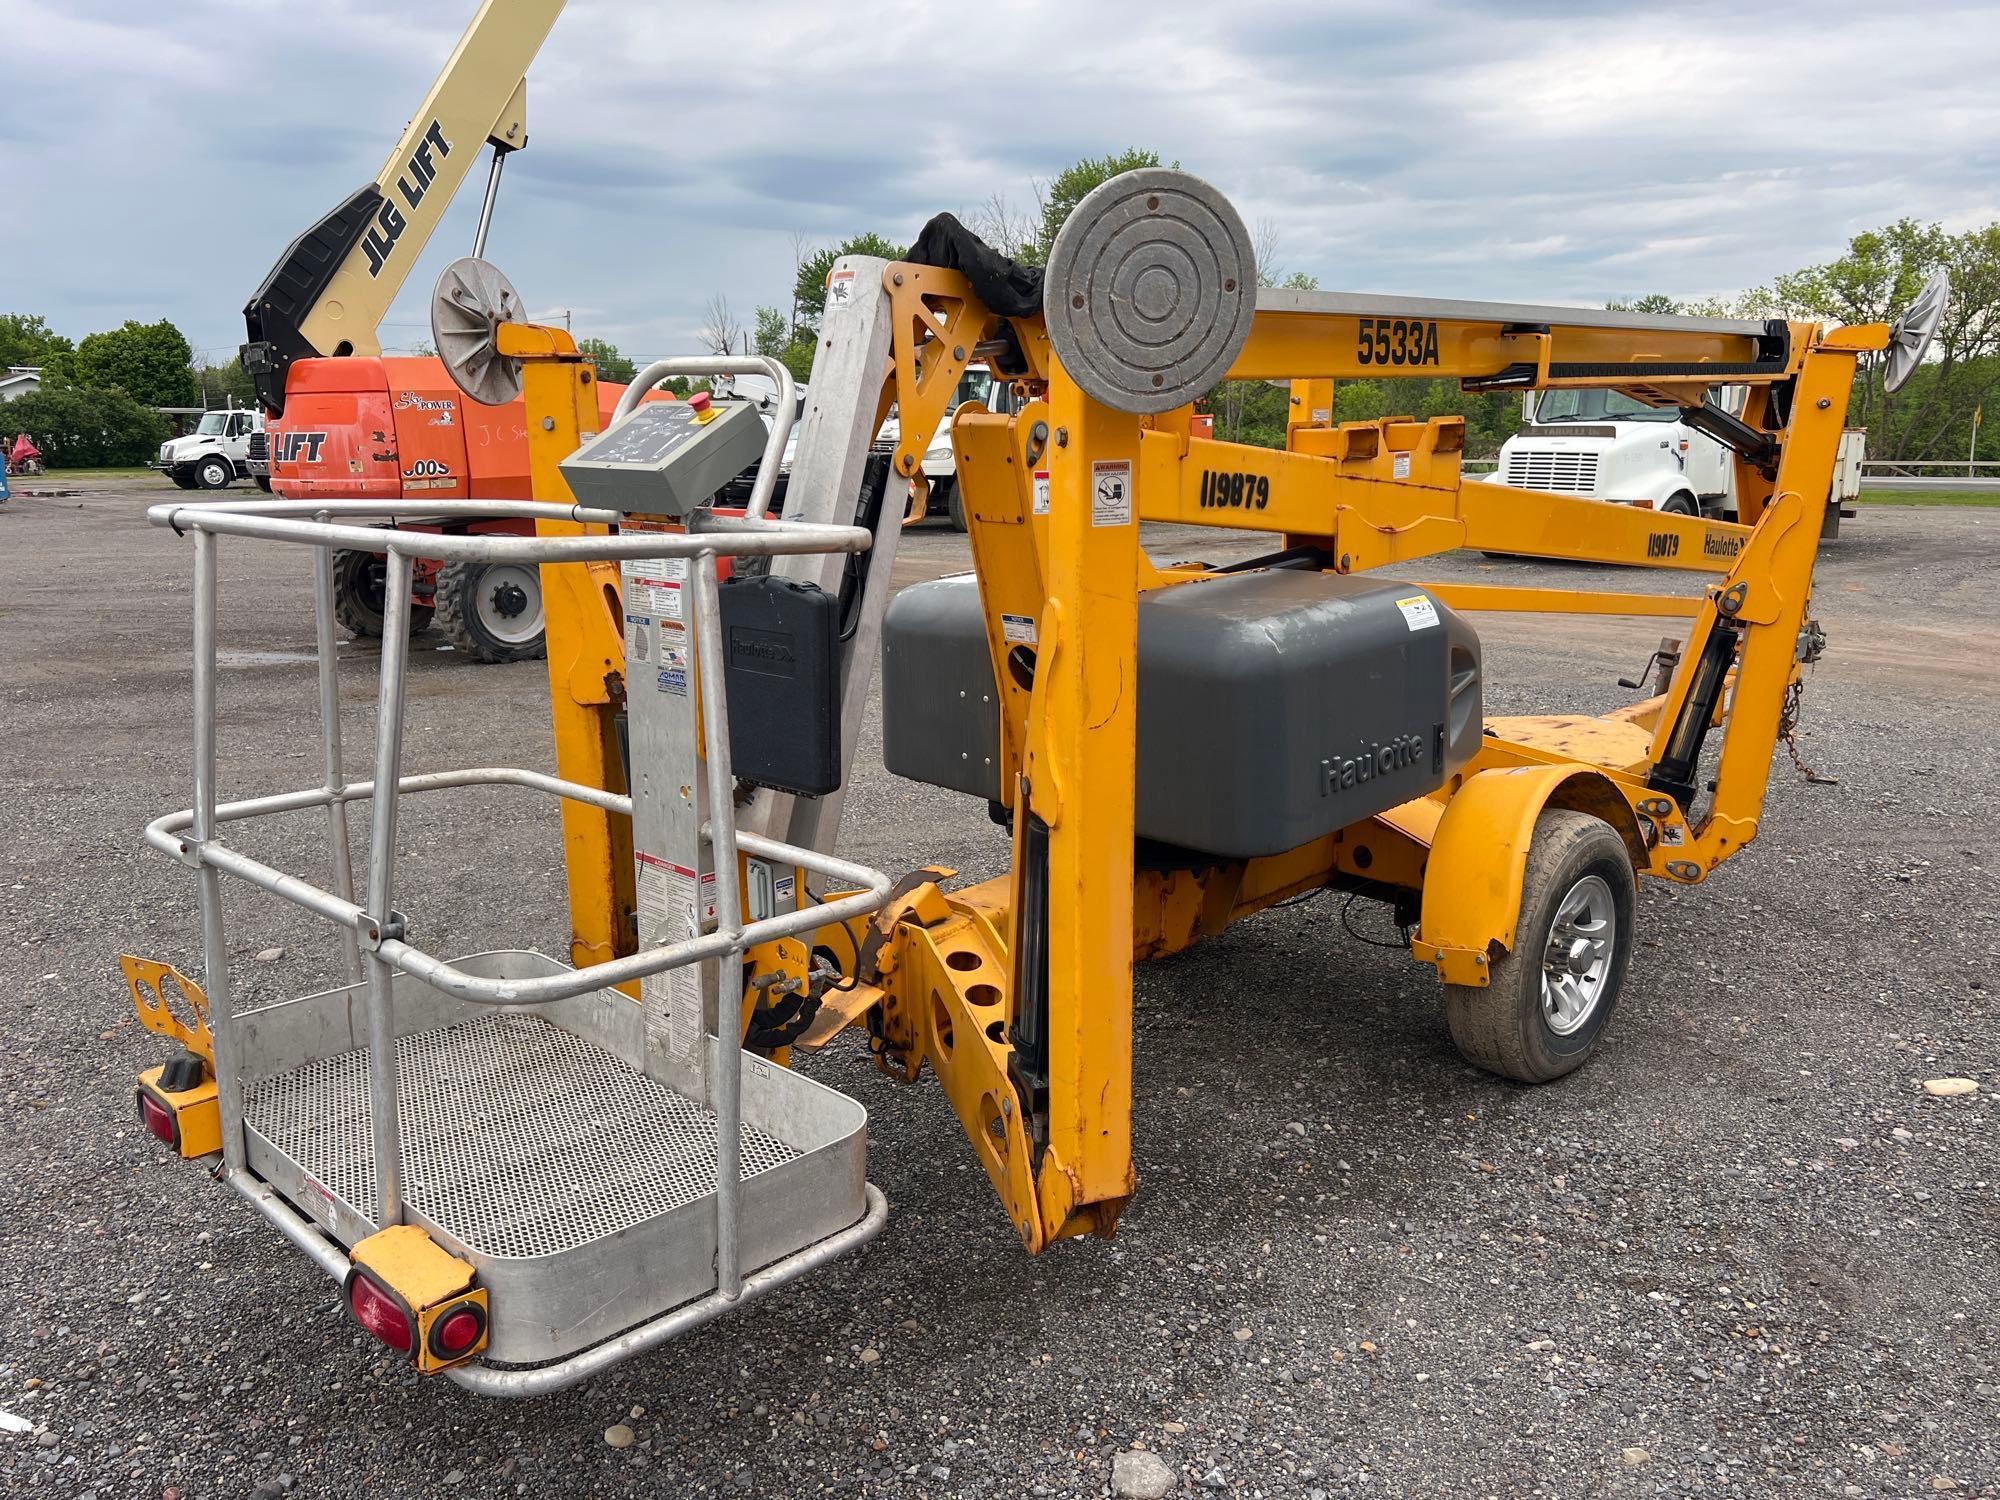 HAULOTTE 5533 ELECTRIC BOOM LIFT... SN-0099...... electric powered, equipped with 55ft. Platform hei